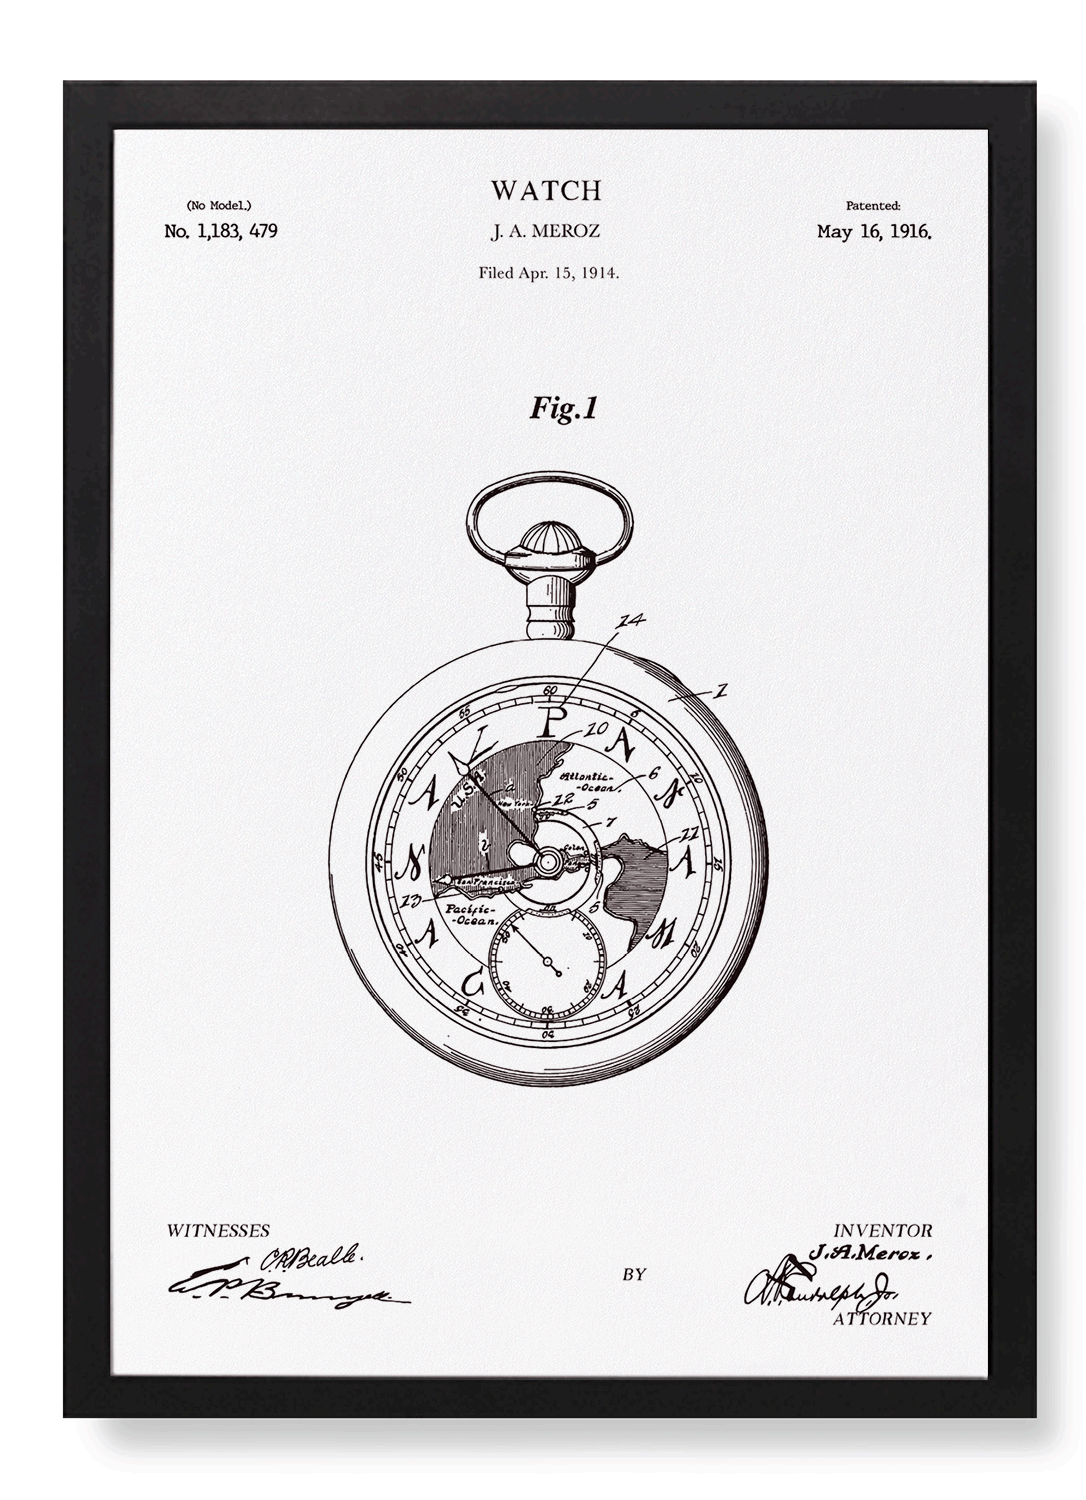 PATENT OF WATCH (1916)